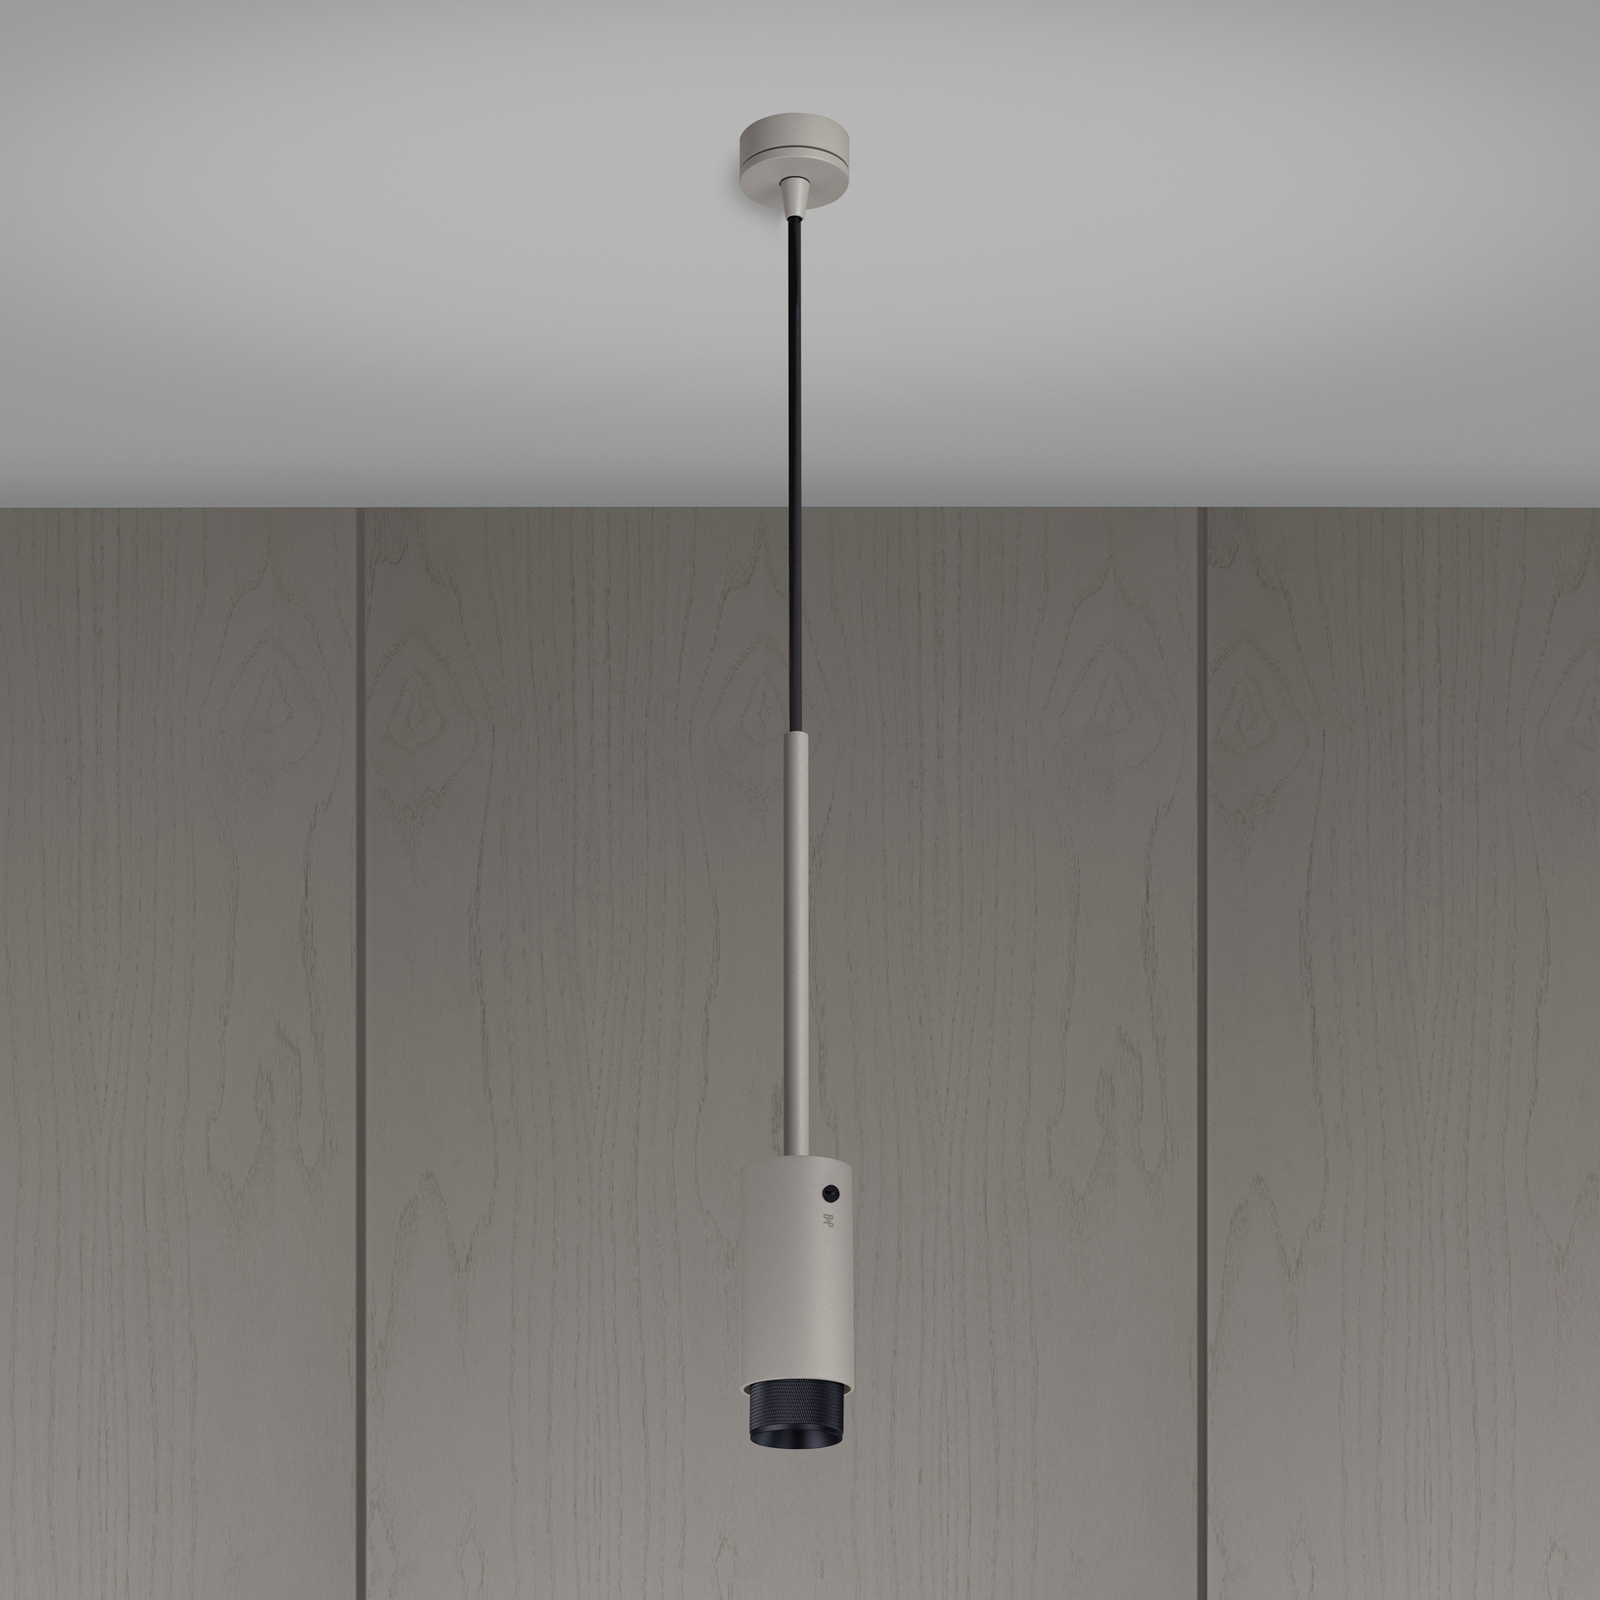 Buster + Punch Exhaust Pendant Cross sivo/crni